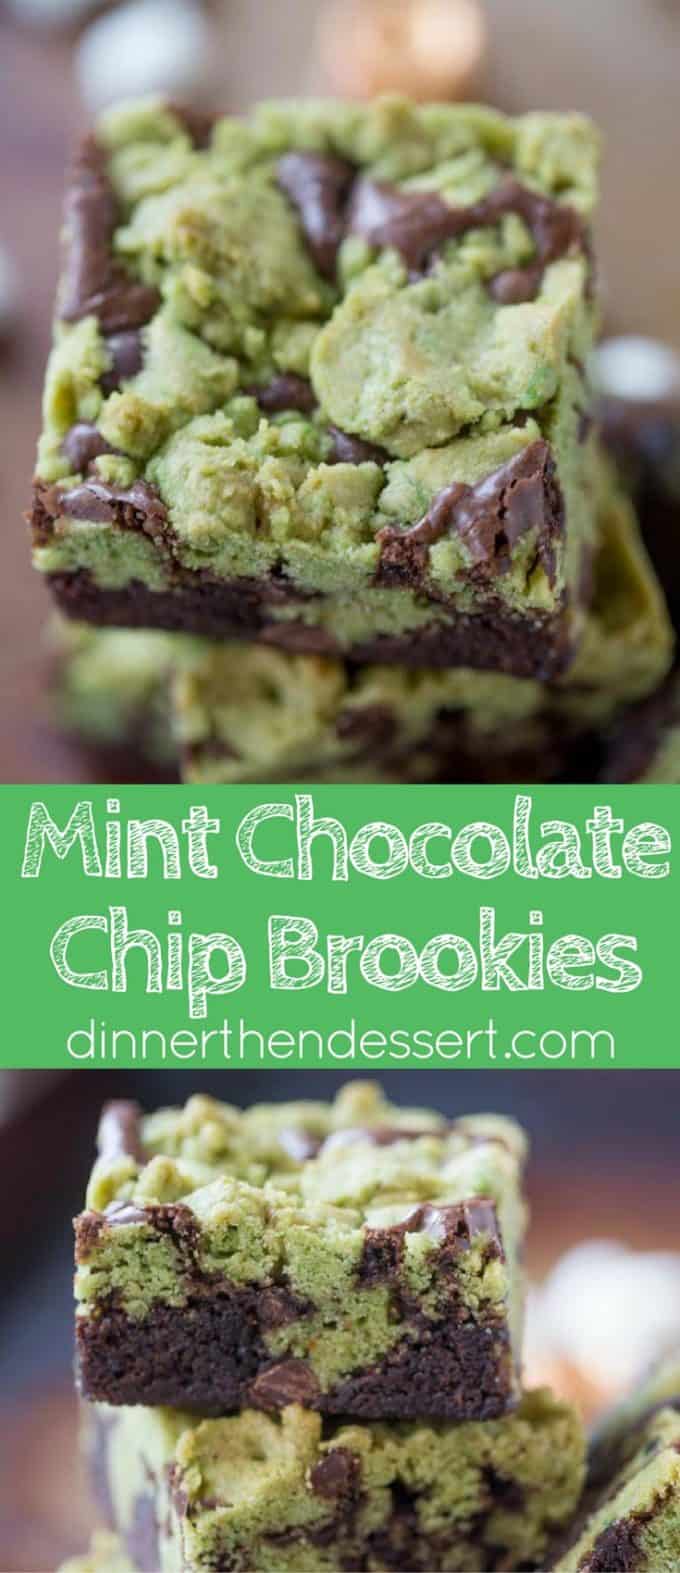 Mint Chocolate Chip Brookies are a delicious combination of mint chocolate chip cookies and rich dark chocolate brownies that tastes like your favorite thin mint cookies.